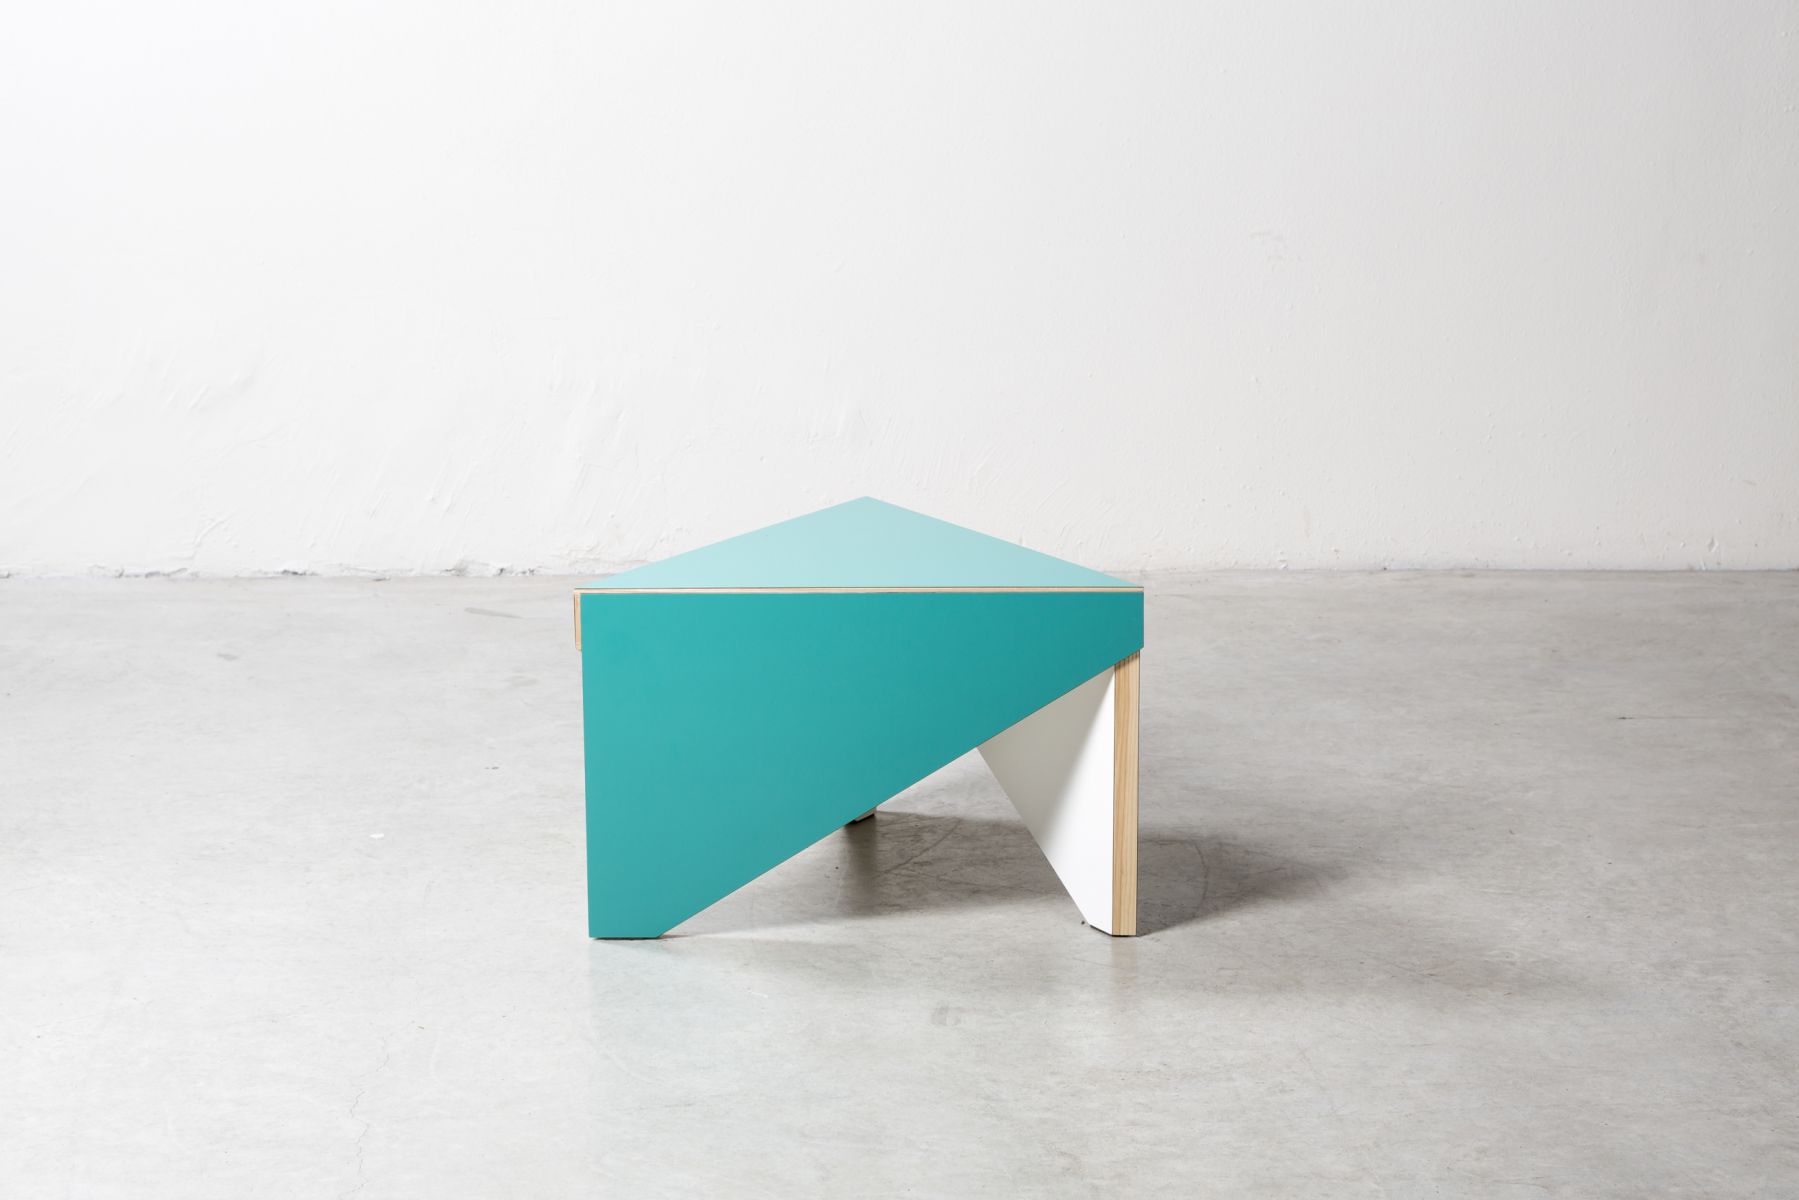 Two low tables Martino Gamper pic-1